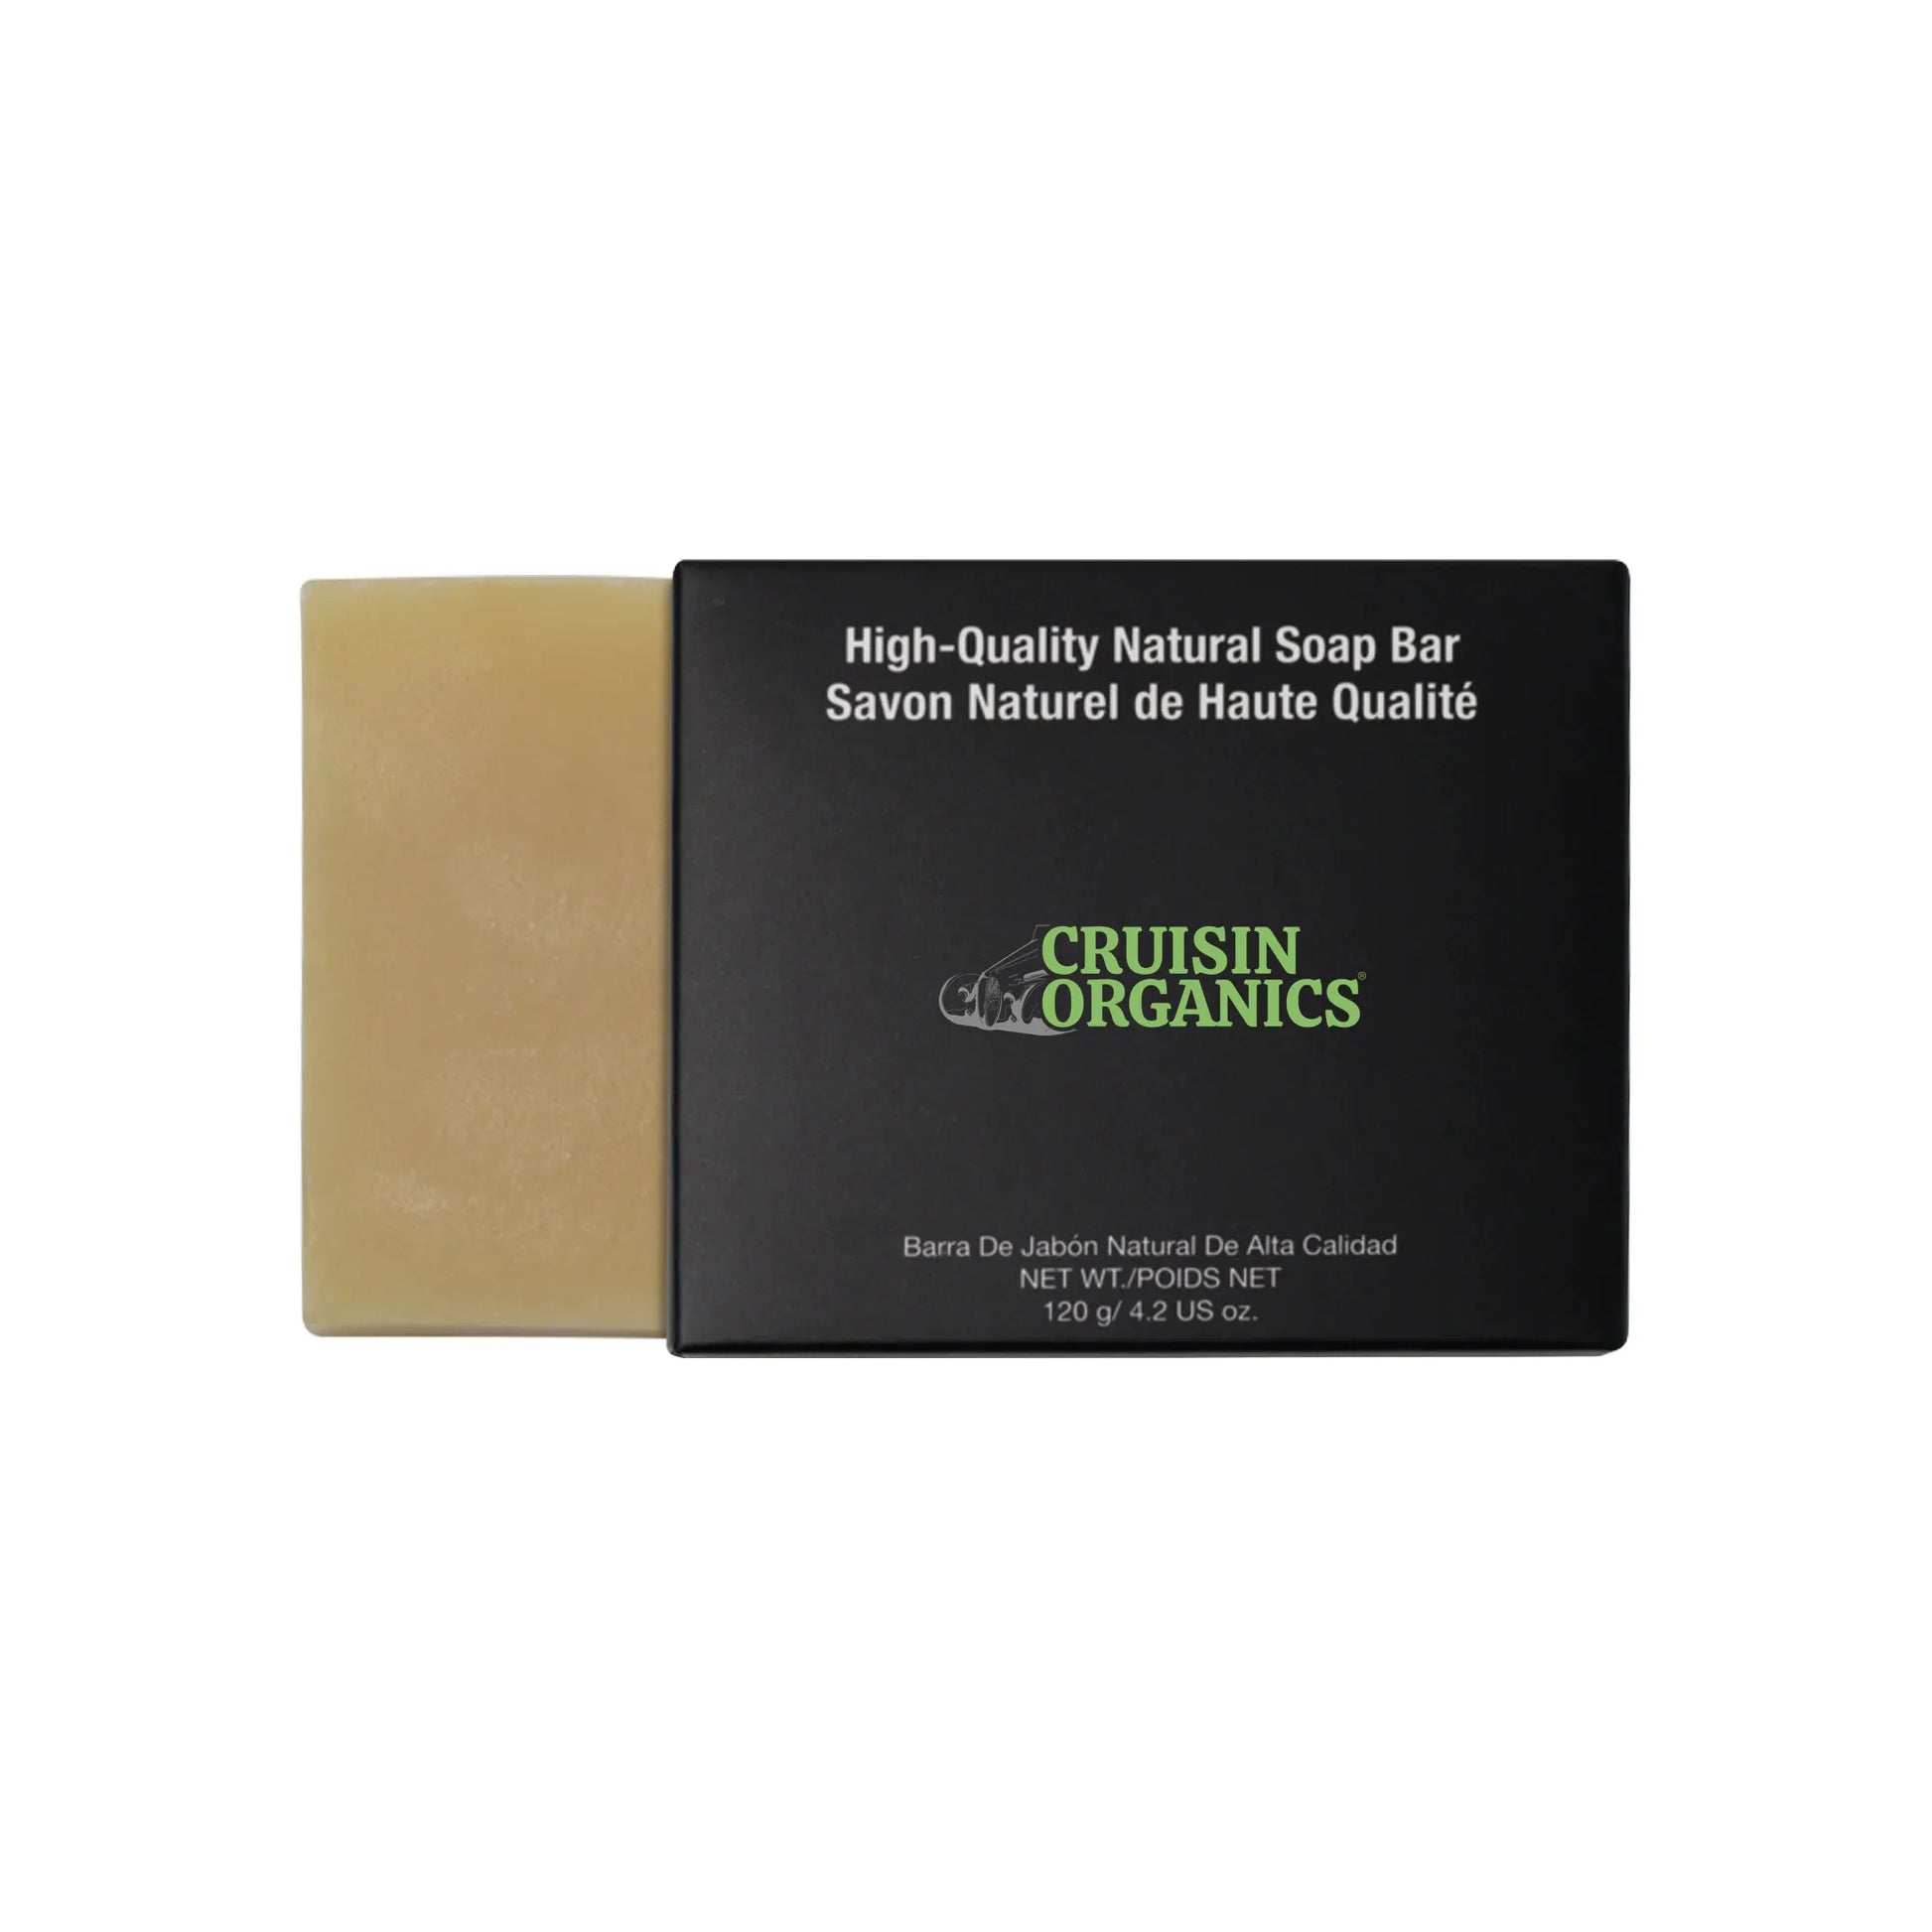 Cruisin Organics tea tree healing soap. Tea tree oil has long been effective to combat acne, scarring, redness, and inflammation. A flawless blend of tea tree oil, eucalyptus oil, and lavender oil brings an exquisite scent, perfect for daily use and versatile for the face, hands, and body. Blending with farm-fresh goat milk